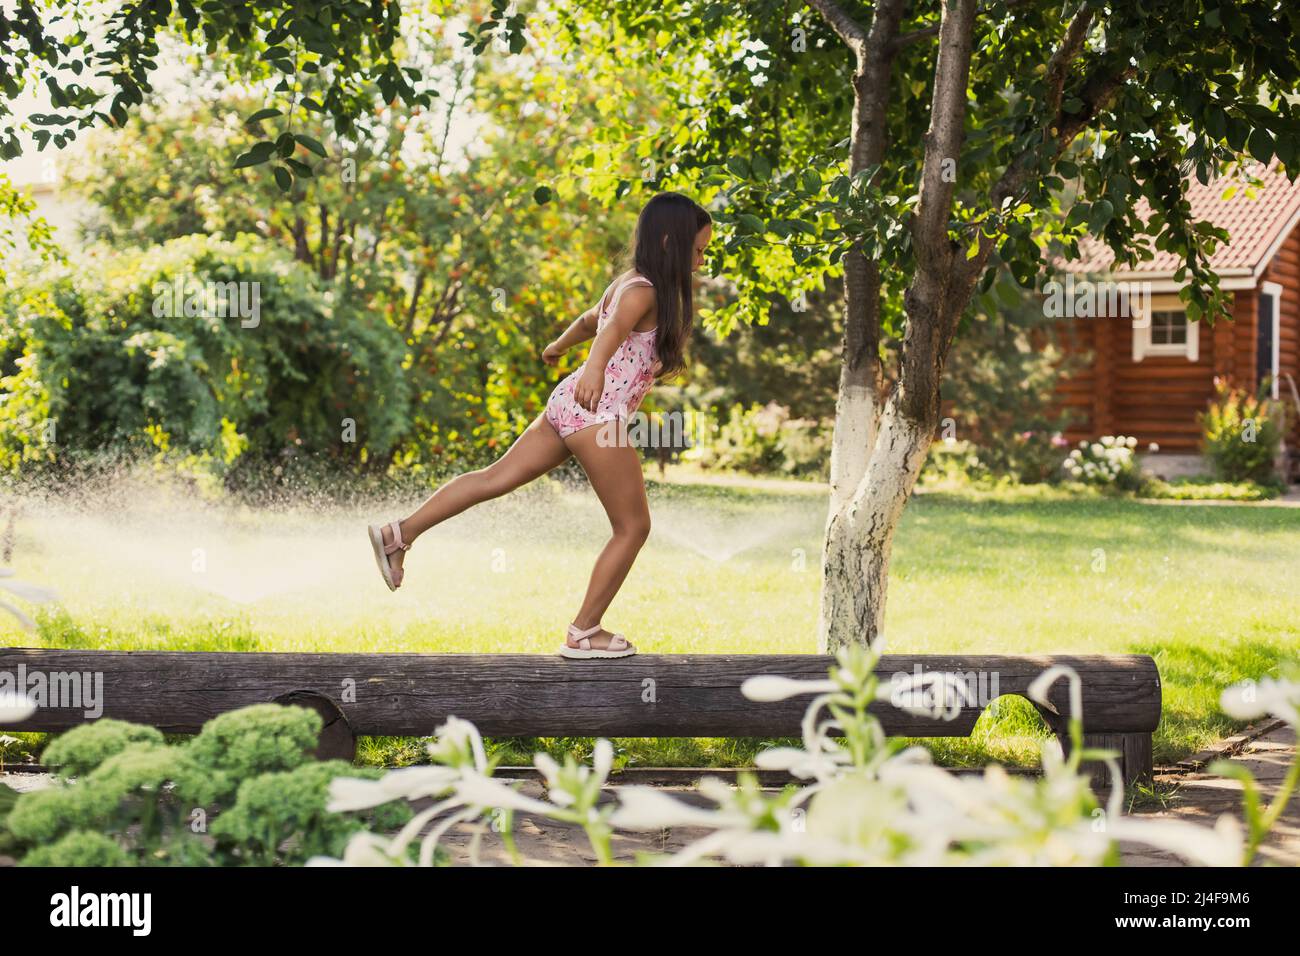 Female kid balancing on log on one foot looking like swallow indulging with water sprinklers, house and green trees in background in daytime. Dreaming Stock Photo